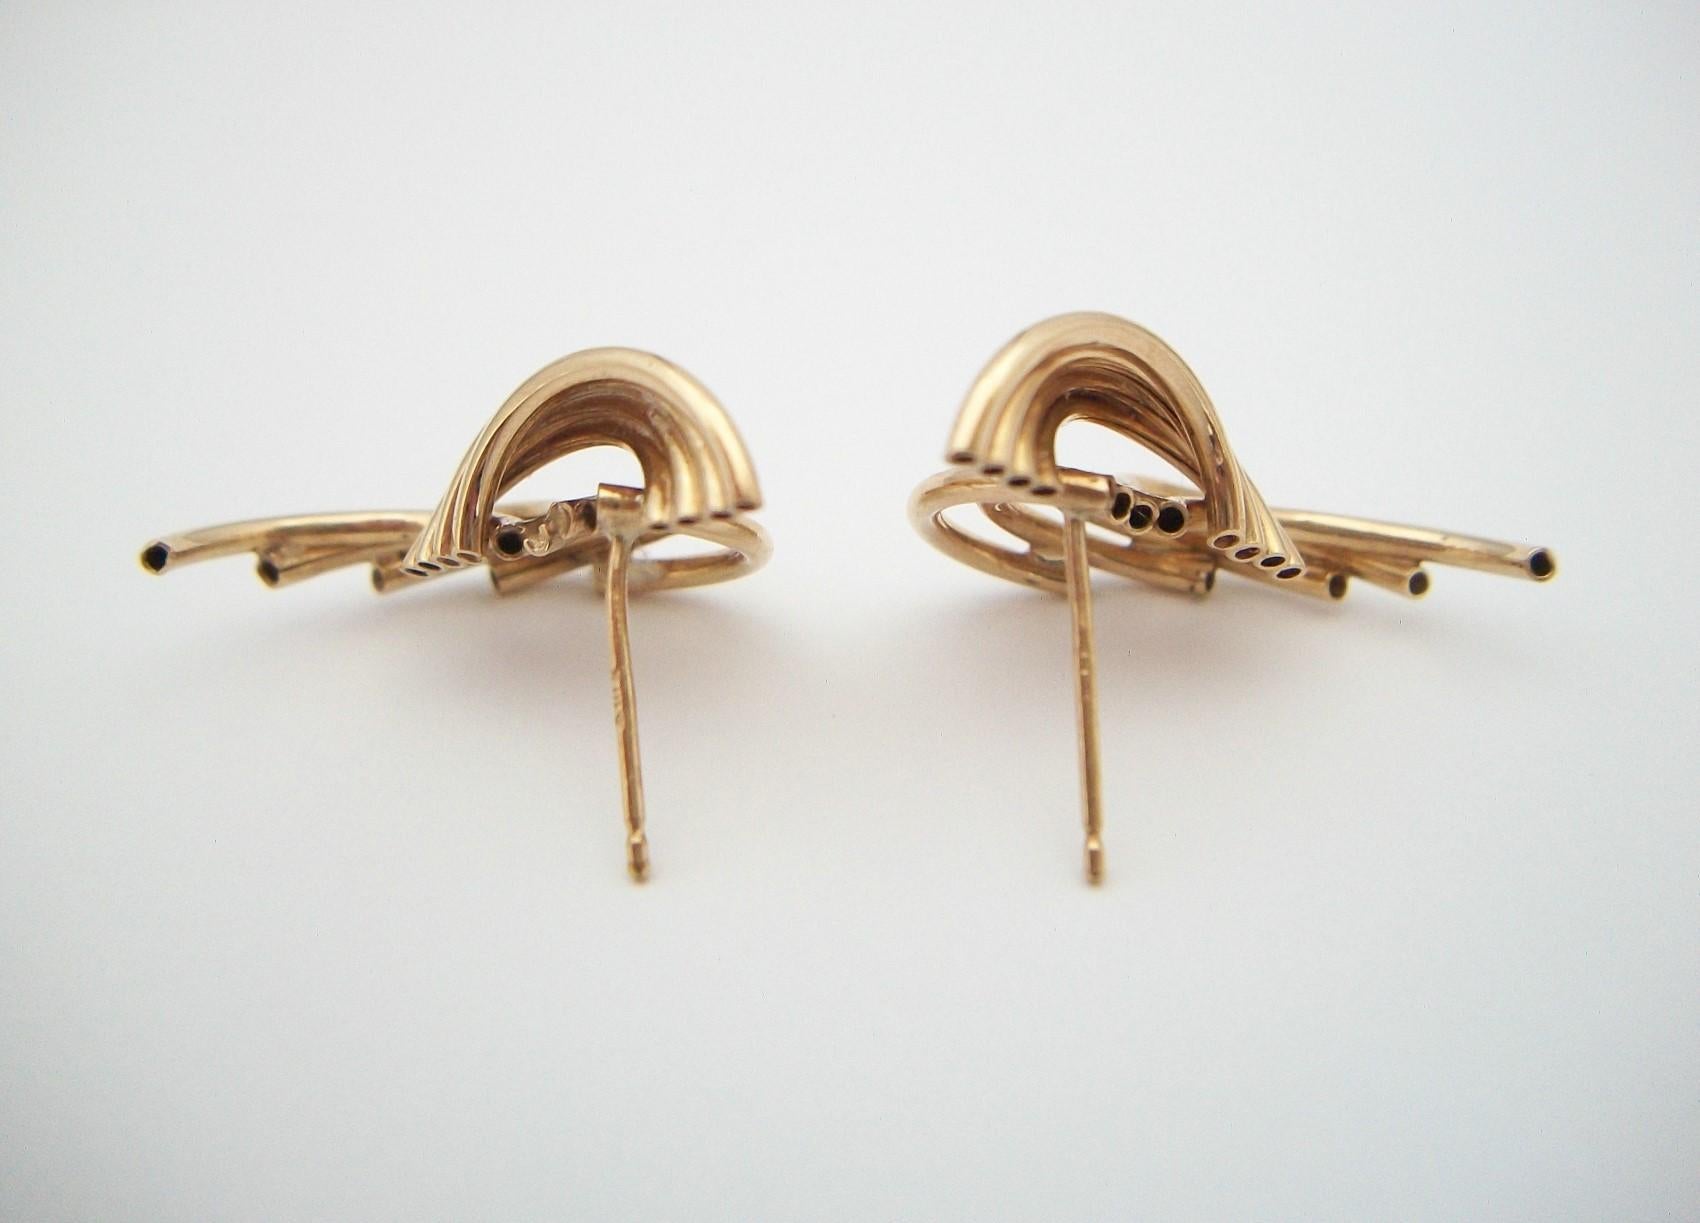 Vintage Pair of 10K Yellow Gold Earrings - U.S. - Circa 1990's For Sale 1